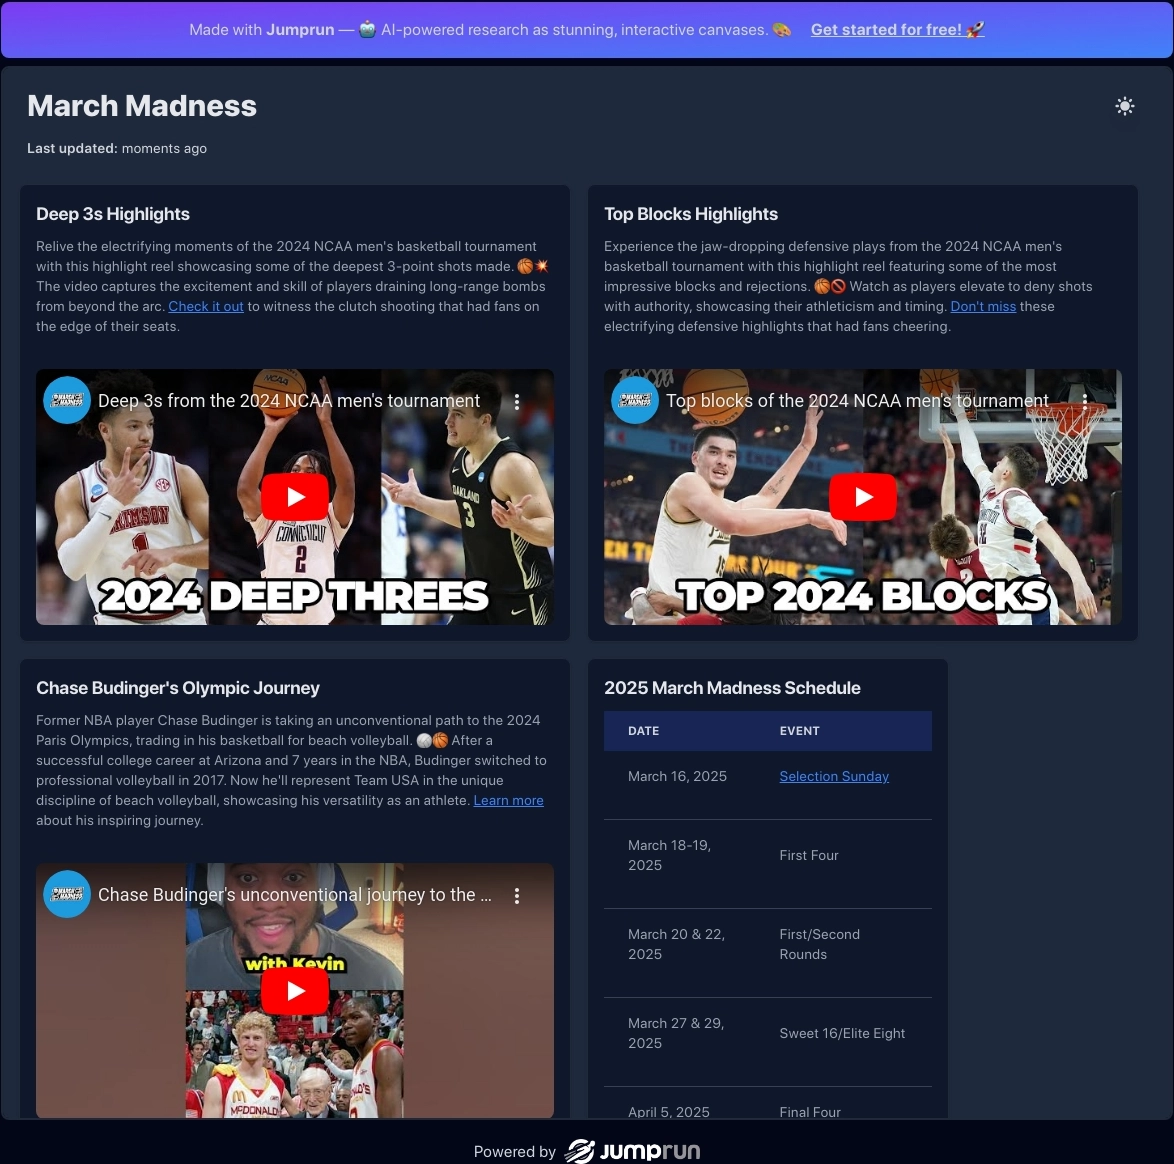 Relive the excitement of March Madness with highlights, schedules, and insights from the 2024 NCAA men's basketball tournament.